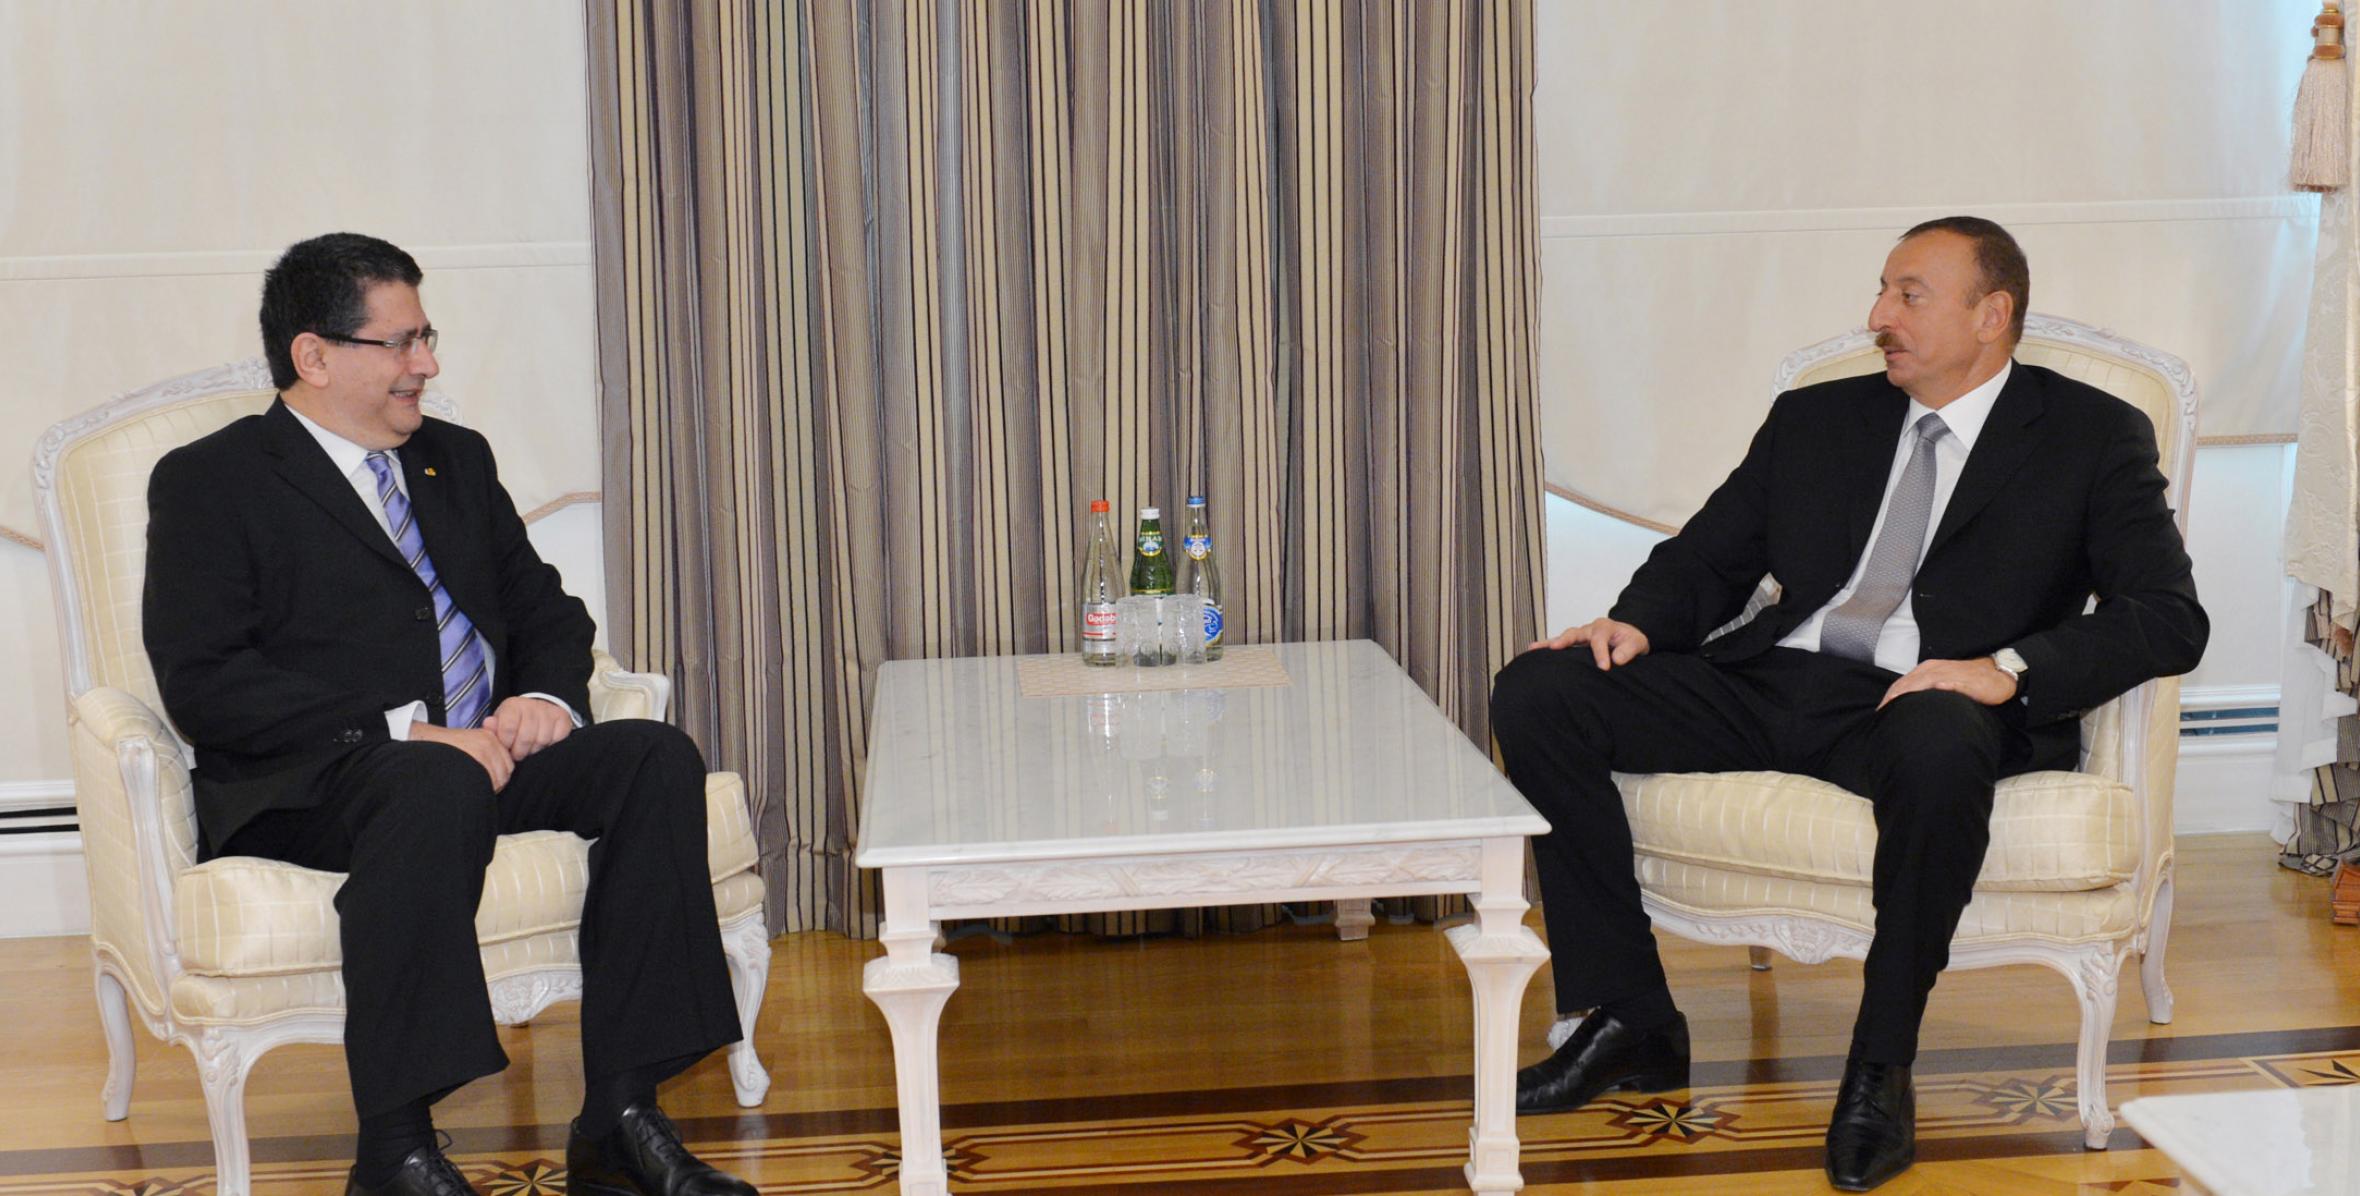 Ilham Aliyev received the outgoing Ambassador of Greece to Azerbaijan at the end of his diplomatic mission in the country